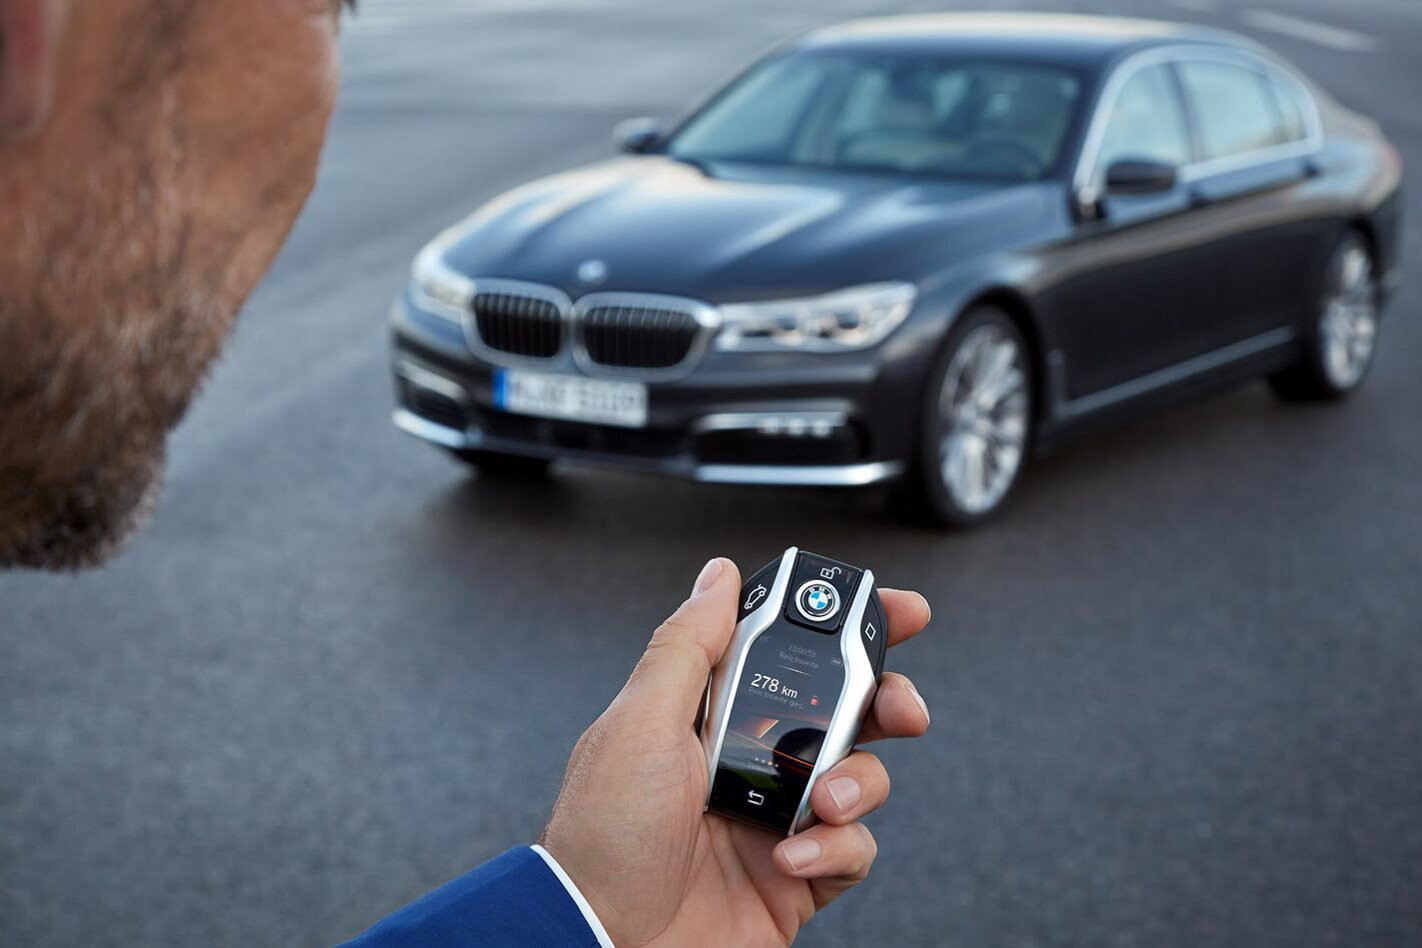 BMW could ditch the traditional car key